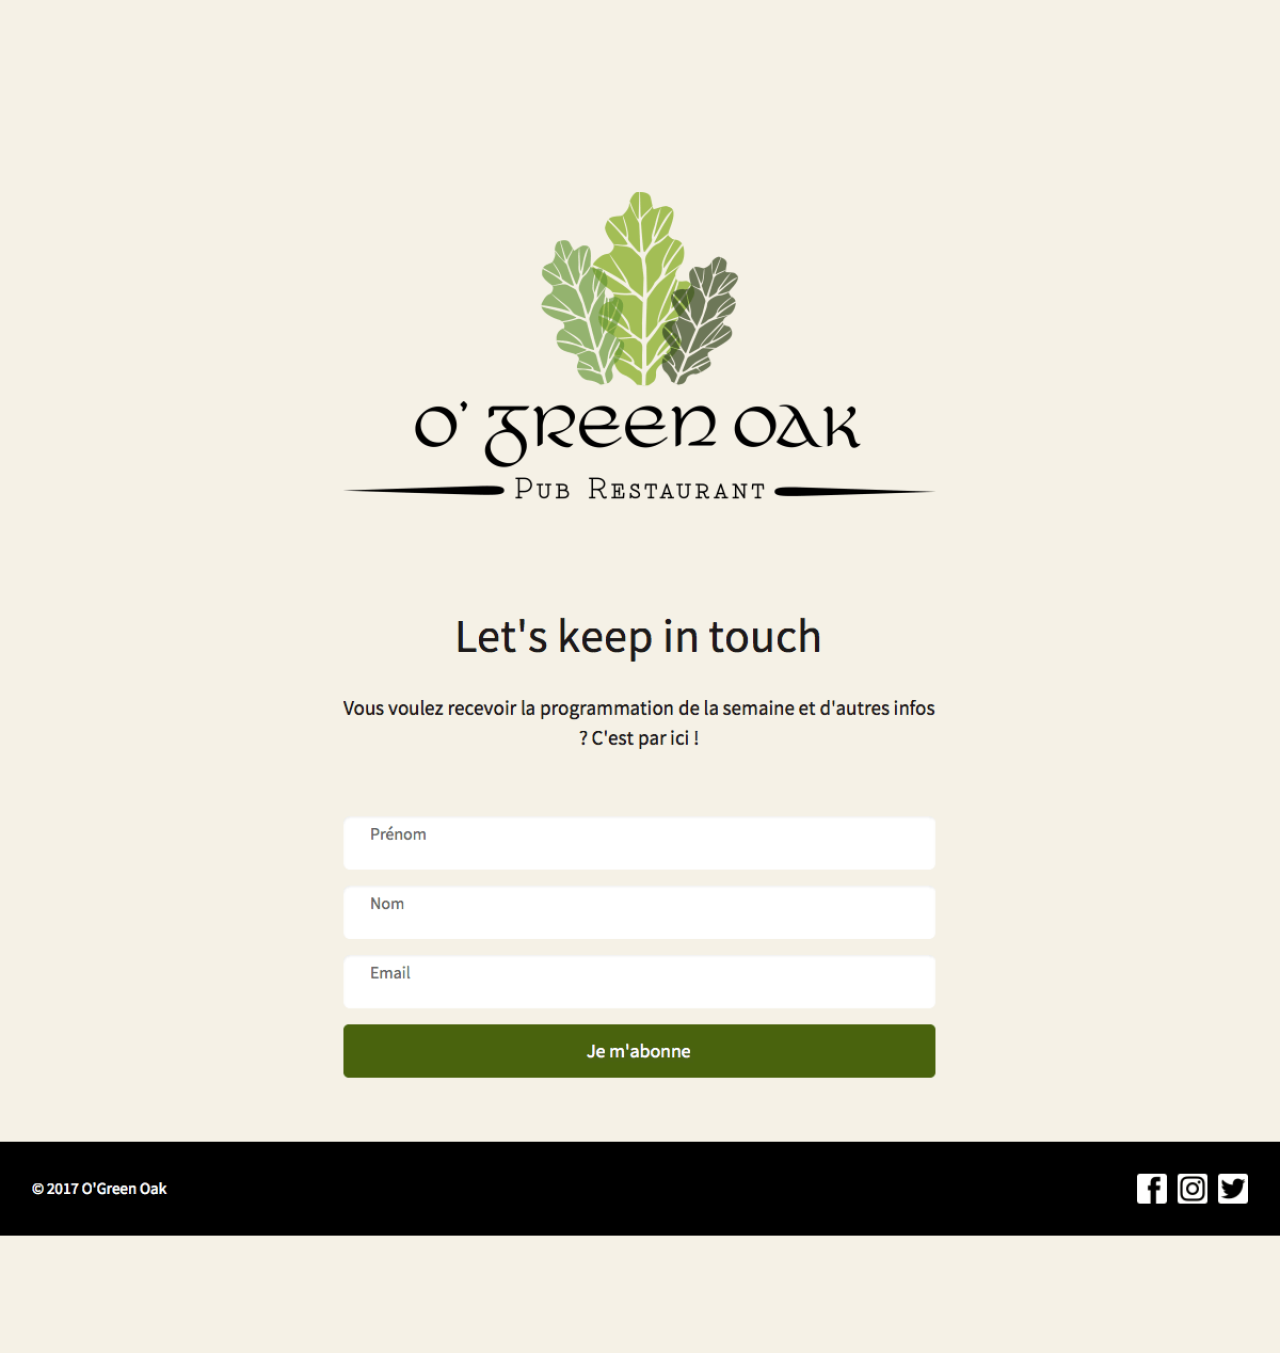 O'Green Oak Pub Restaurant example - Made with MailerLite